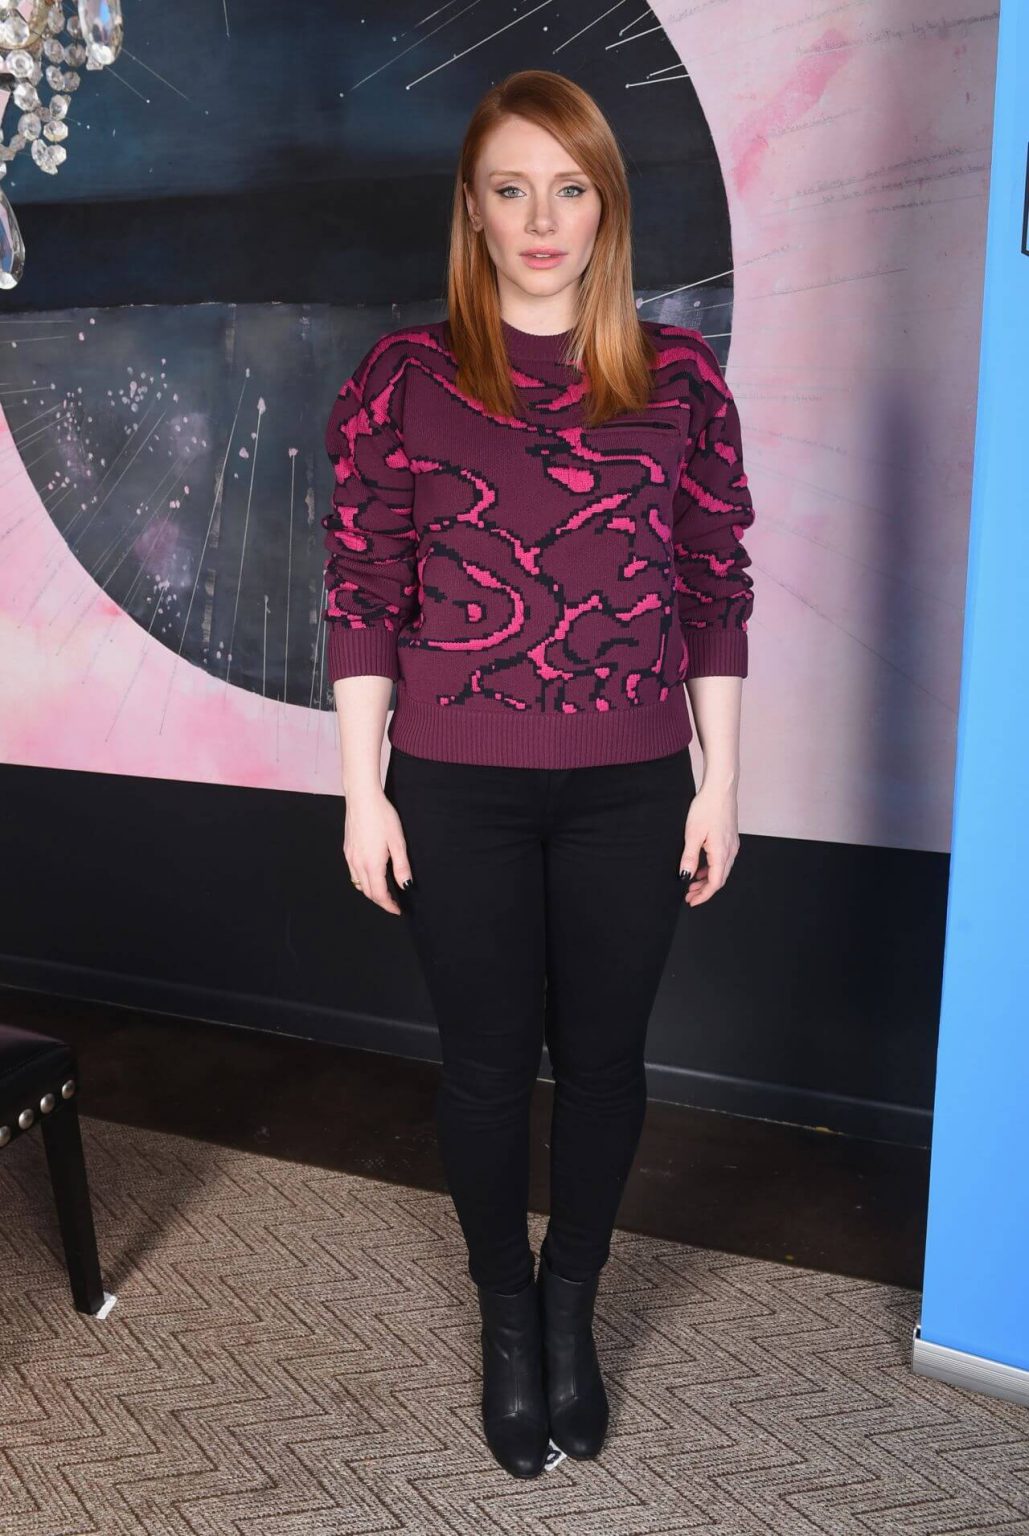 Bryce Dallas Howard - Outfits, Style, And Looks - K4 Fashion